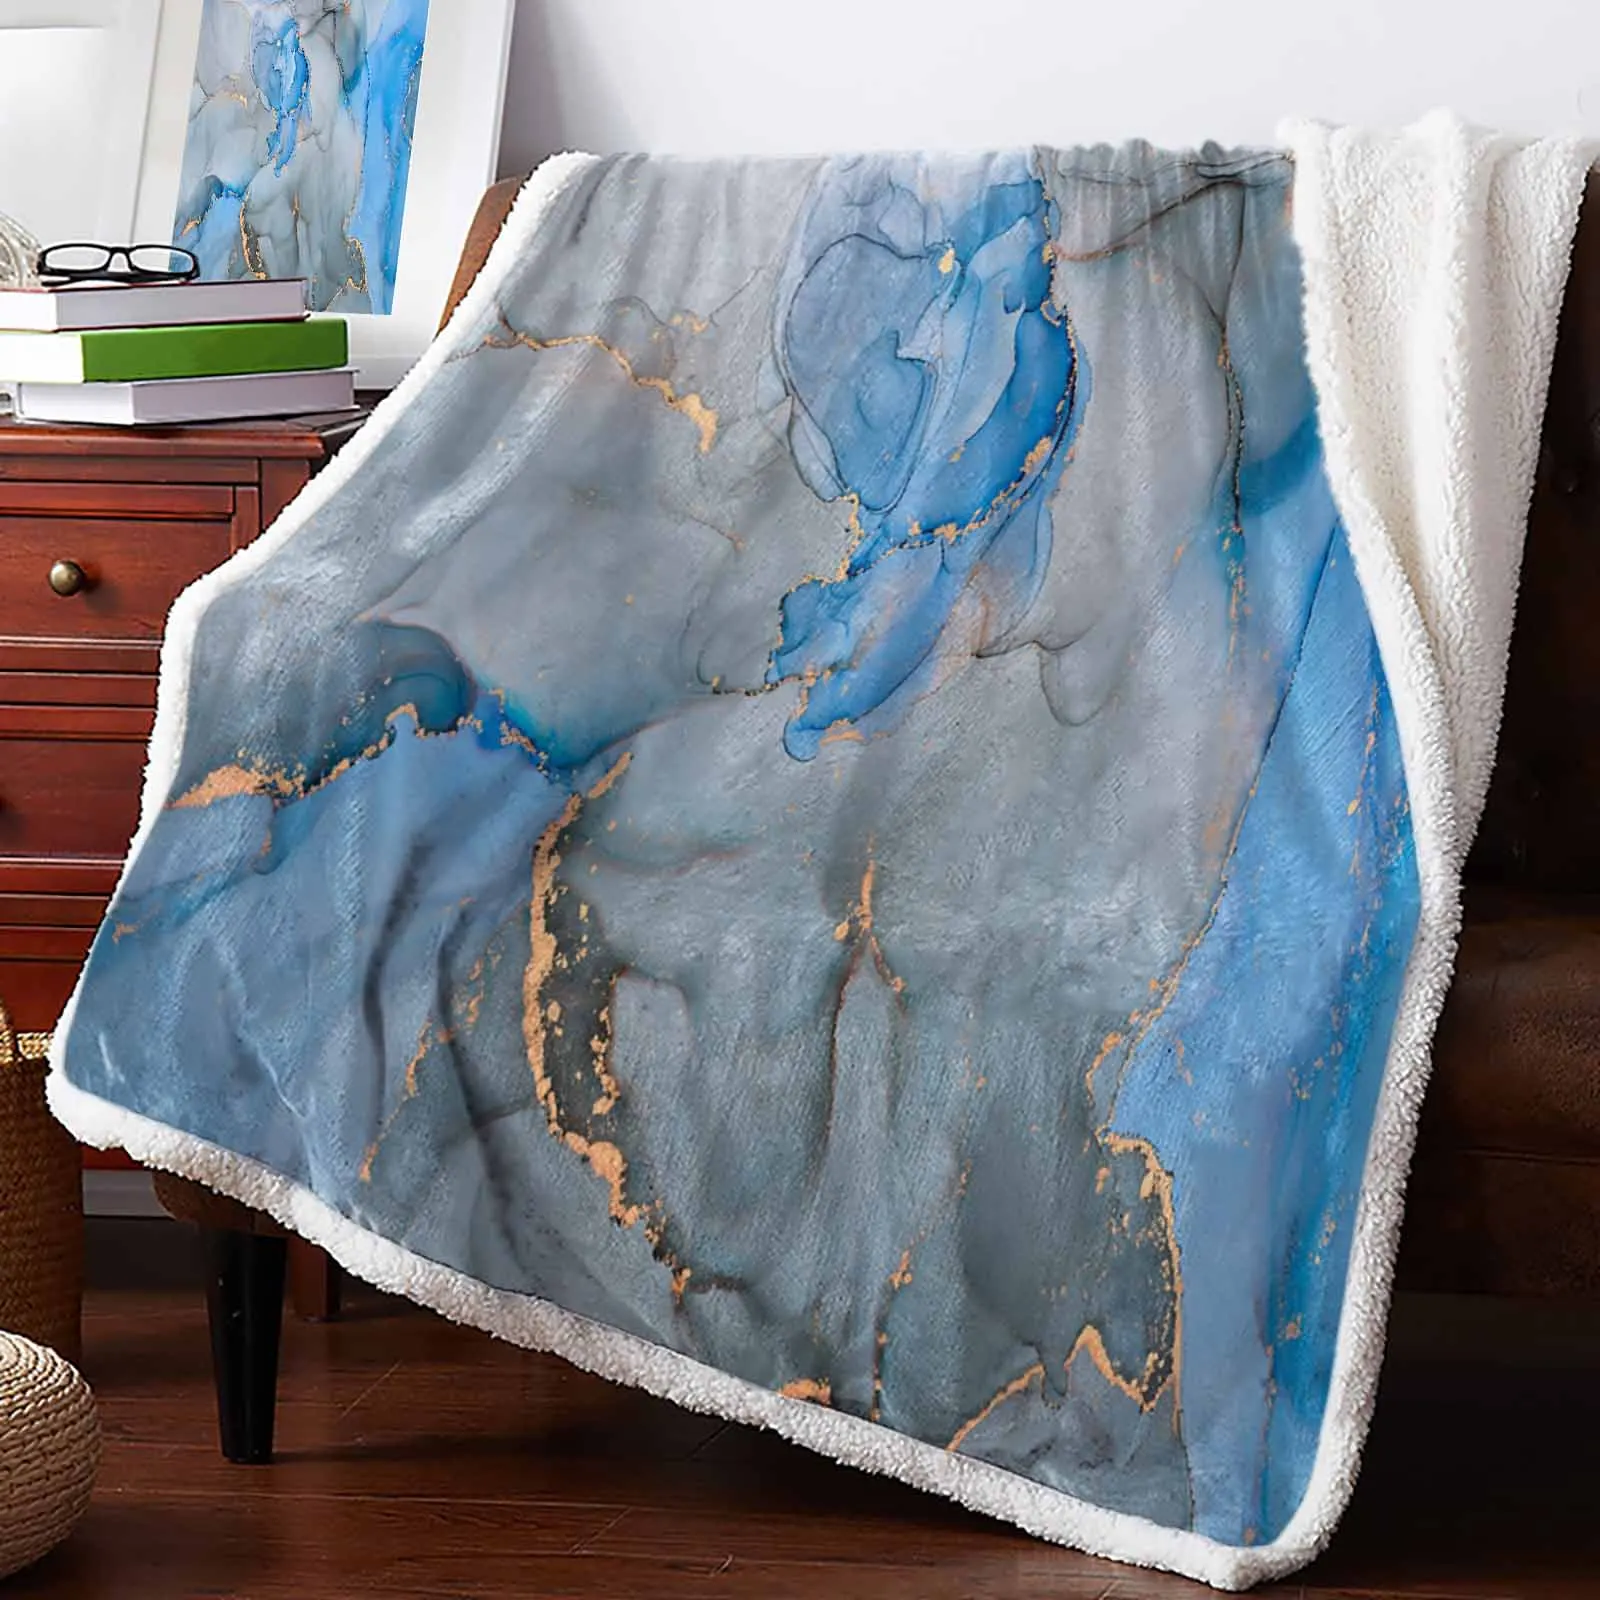 

Marble Texture Watercolor Blue Gray Cashmere Blanket Winter Warm Soft Throw Blankets for Beds Sofa Wool Blanket Bedspread